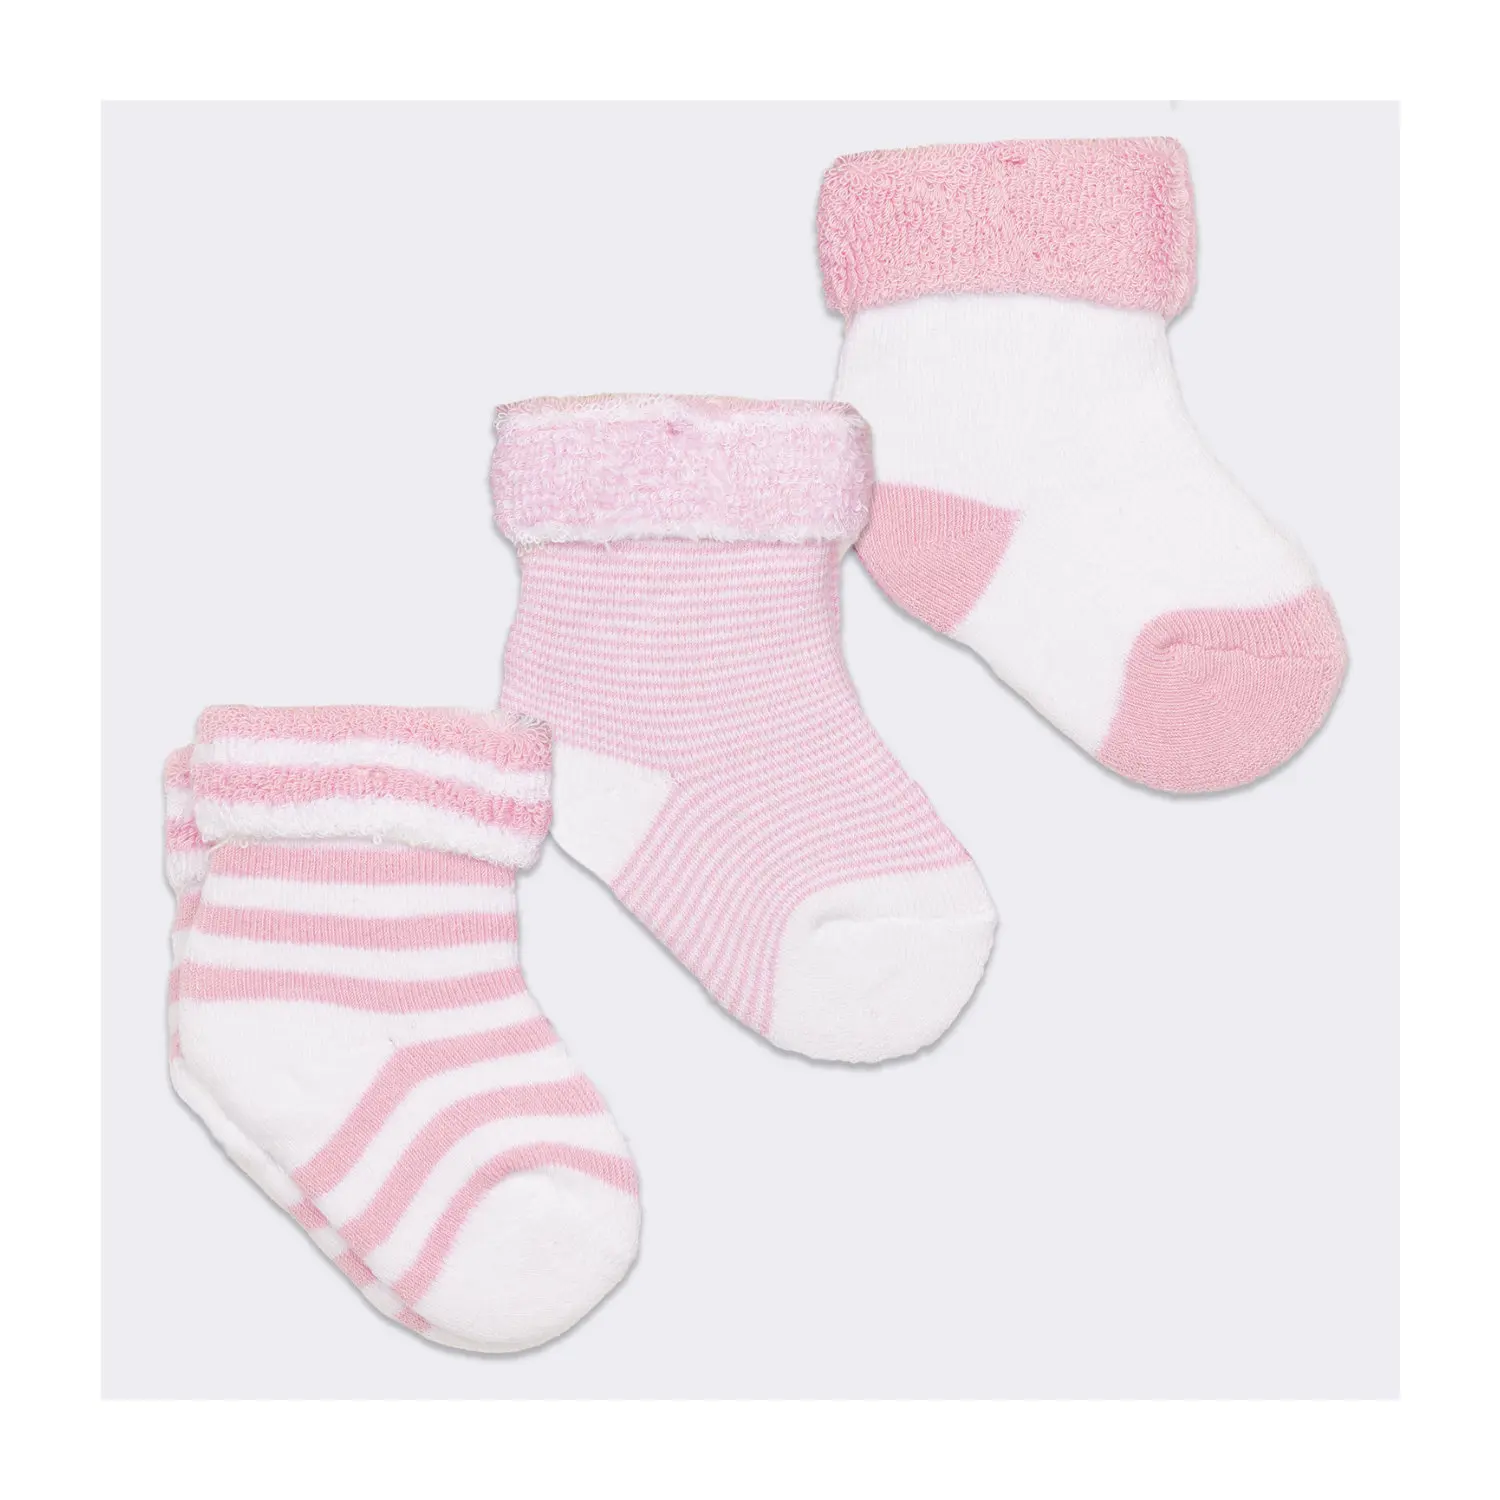 Factory Wholesale   Made in Italy Socks Baby different Patterns   Organic Cotton Baby Socks for Boys and Girls   kids socks (11000001820188)